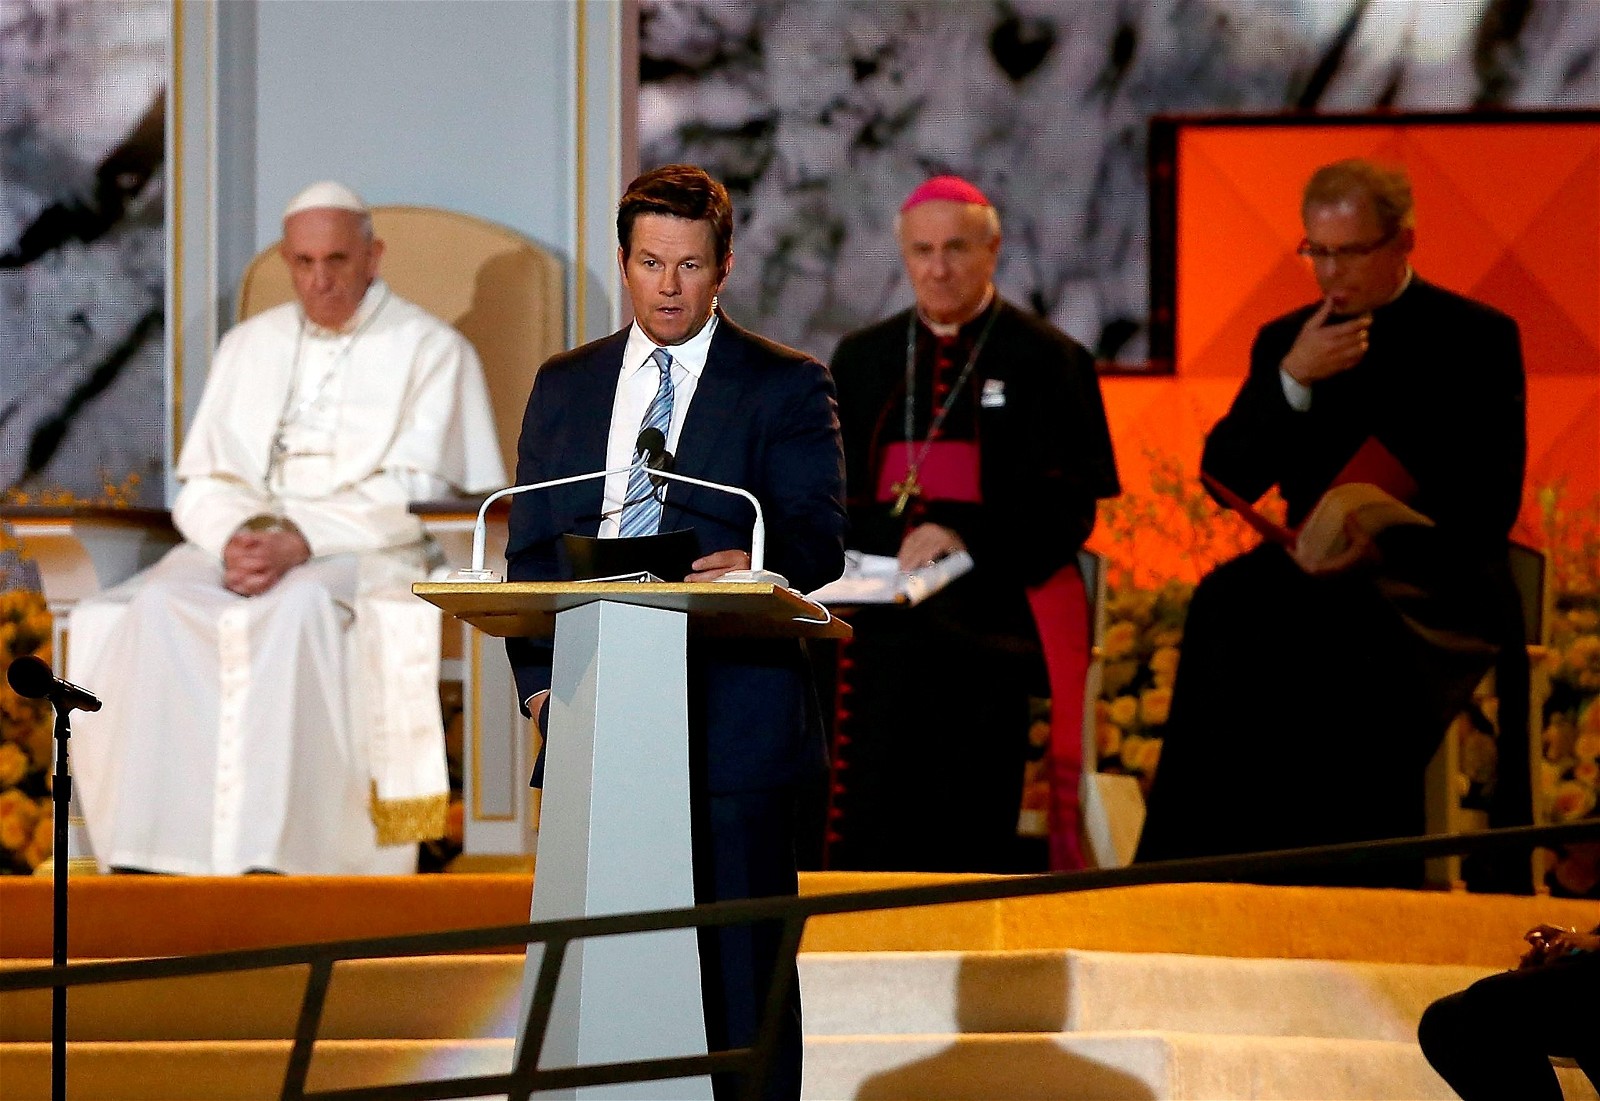 Mark Wahlberg on stage at the World Meeting Of Families